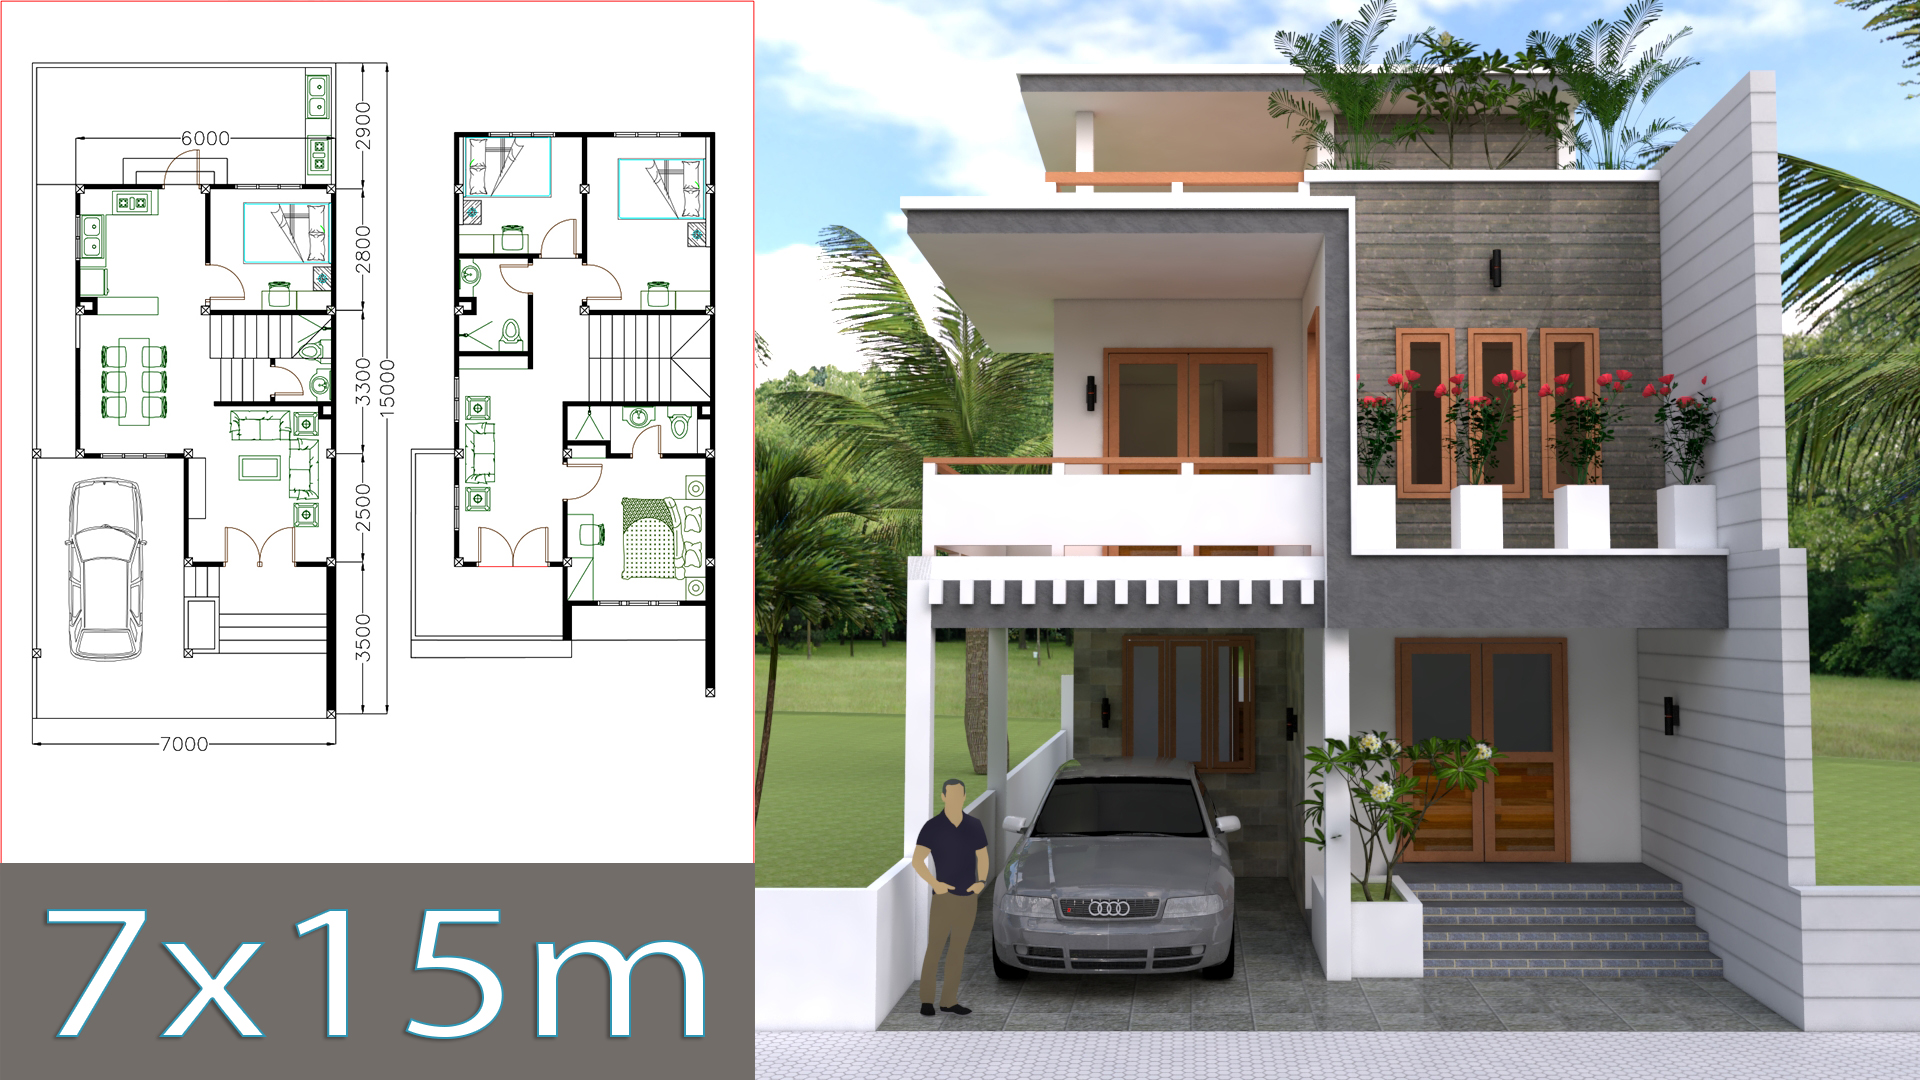 House Plans 7x15m with 4 Bedrooms - SamHousePlans